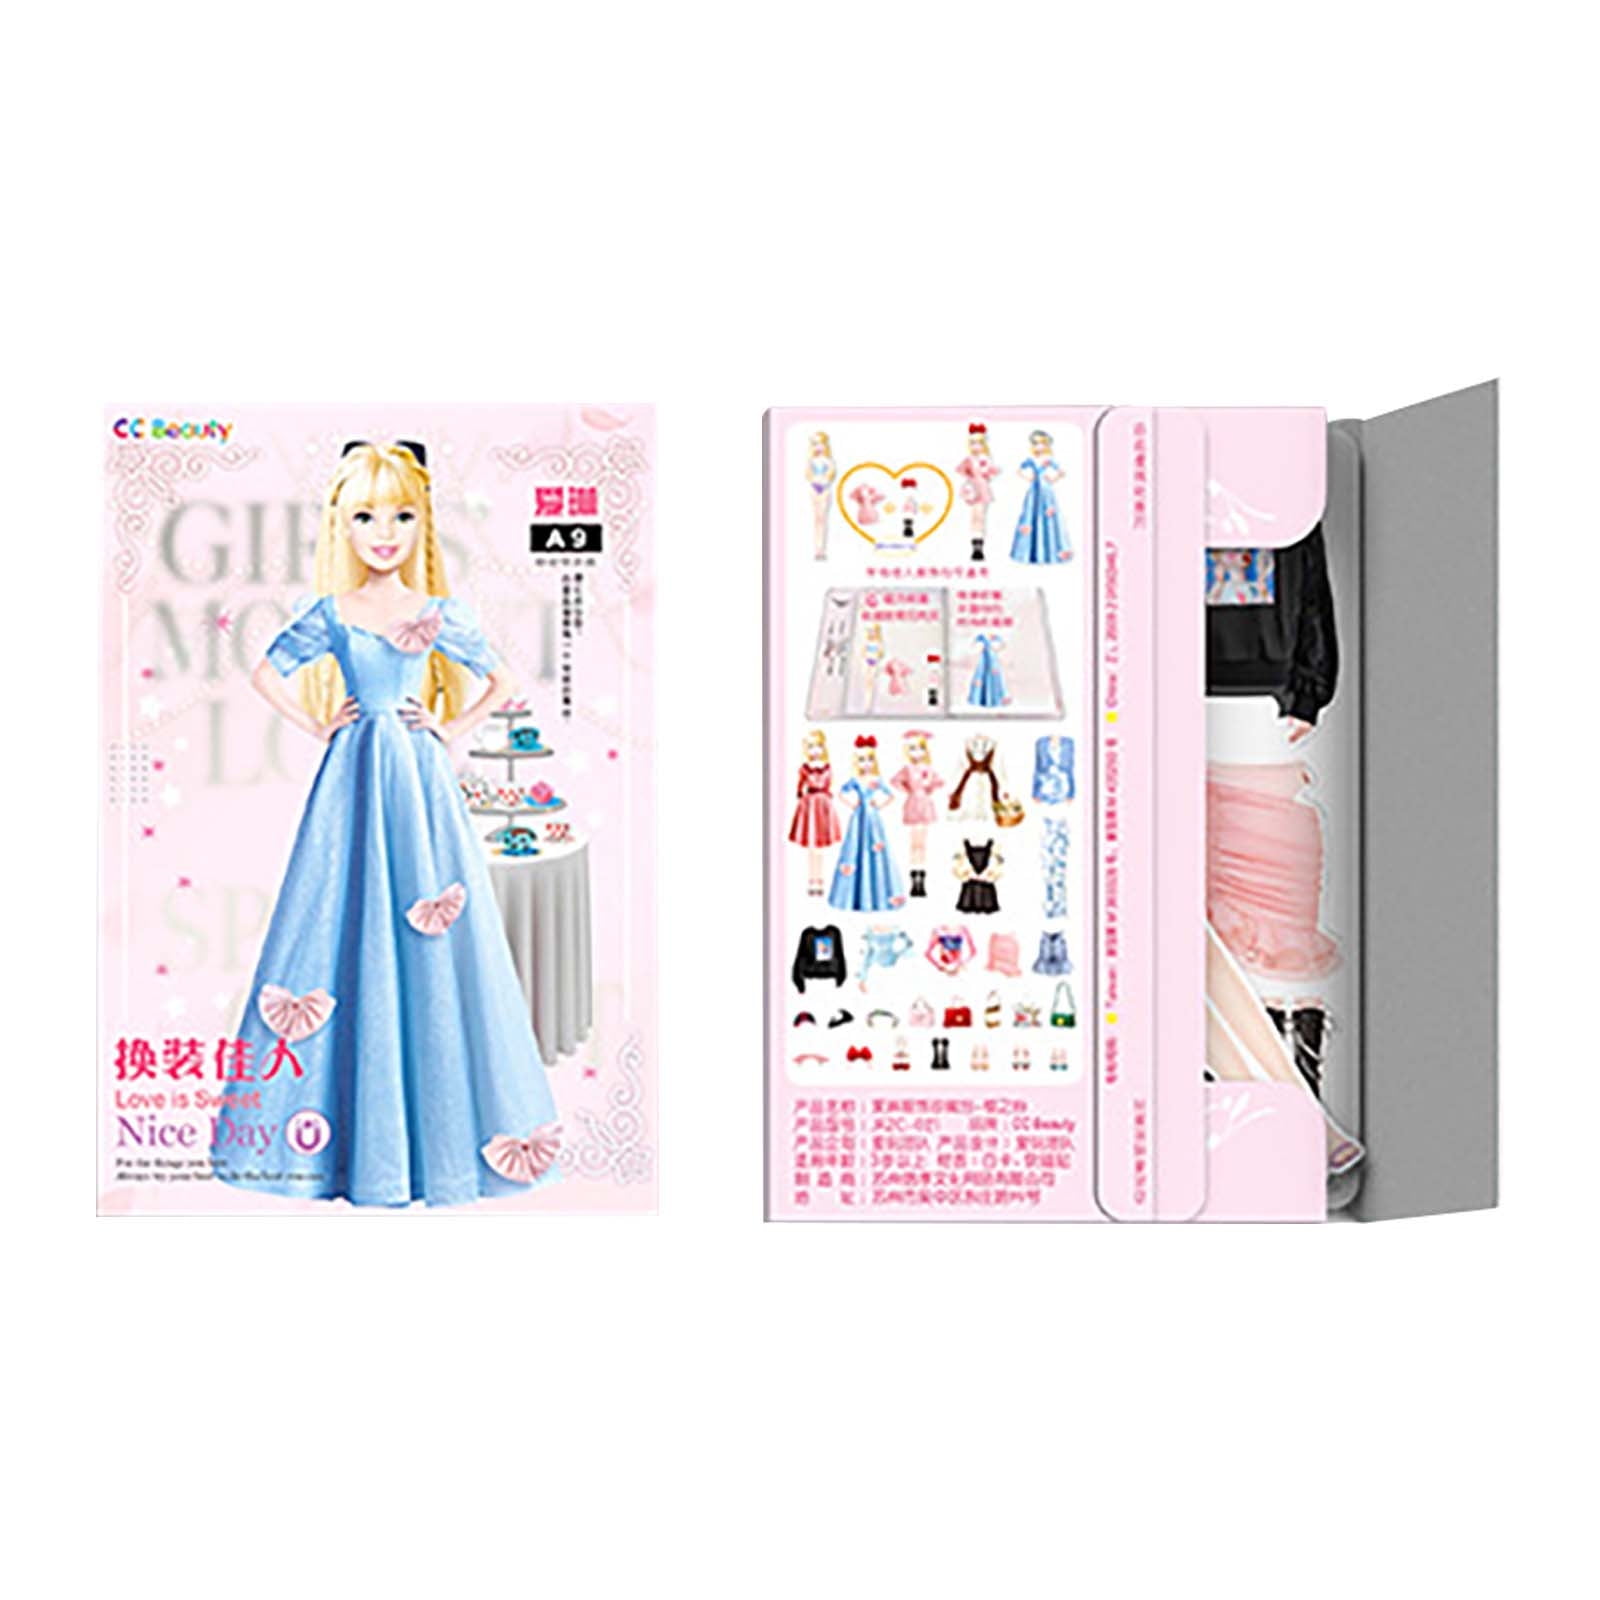 Ma-gnet Princess Dress-up Doll Clothes Toys Kids Ma-gnetic Baby Dress Up  Paper Doll Μagnet Dresssing Games, Pretend Play Travel Playset Toy Dolls  For